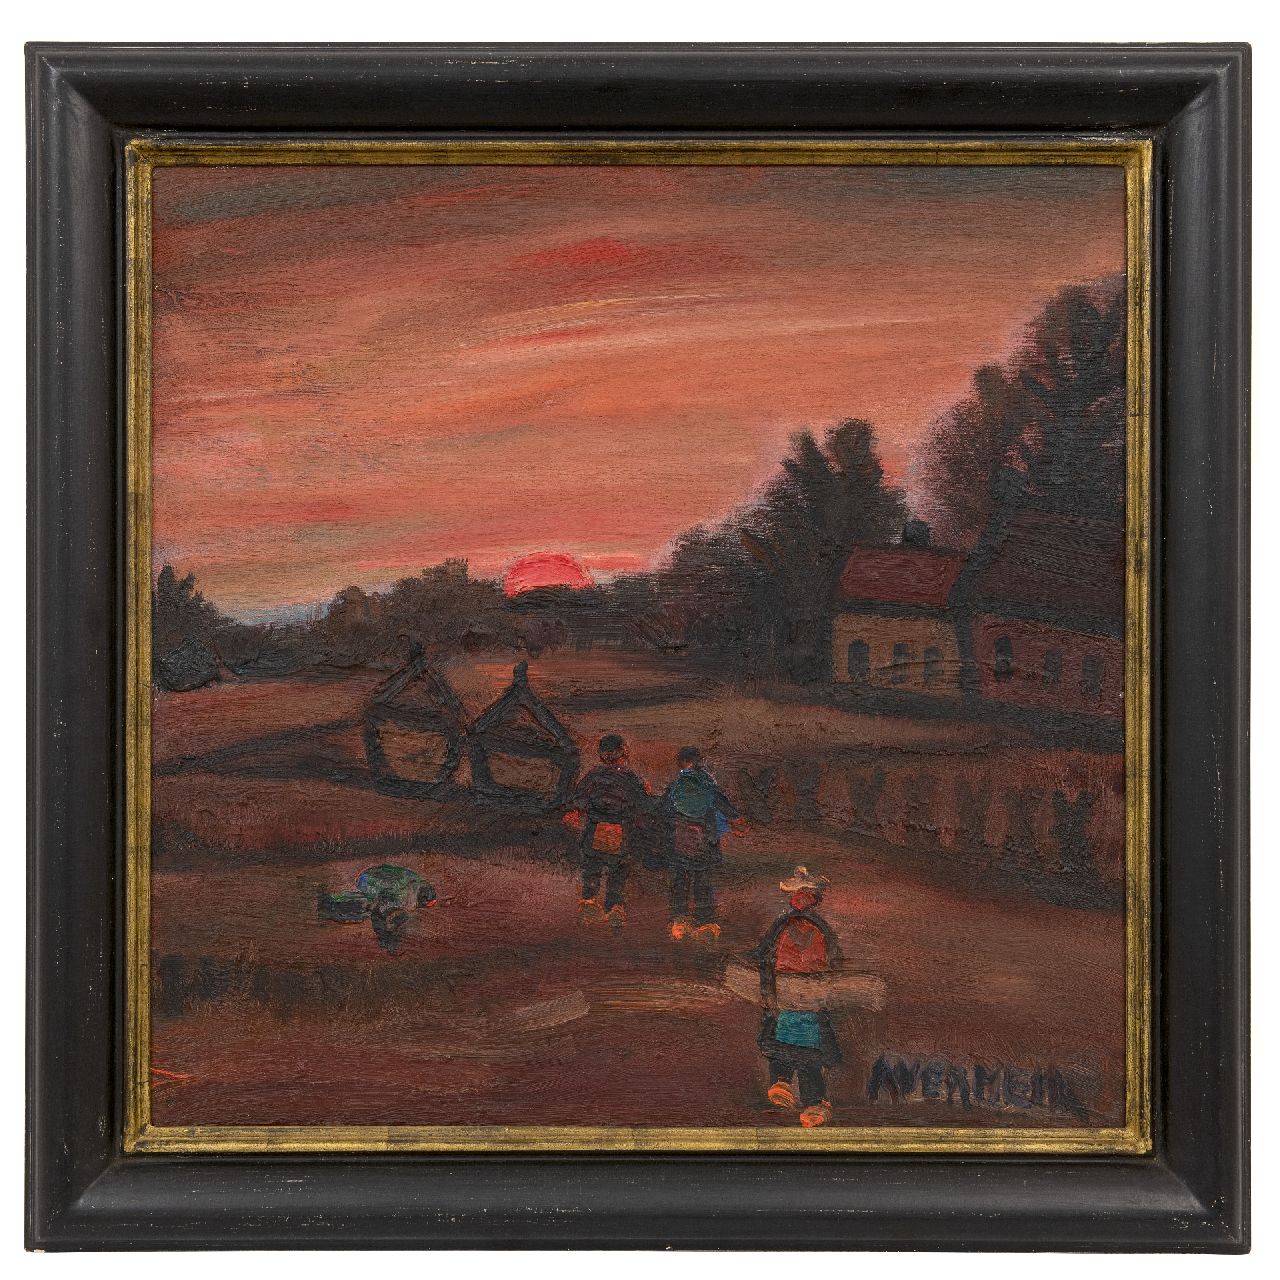 Vermeir A.  | Alfons Vermeir | Paintings offered for sale | Landscape with farmers, oil on painter's board 60.0 x 60.0 cm, signed l.r.